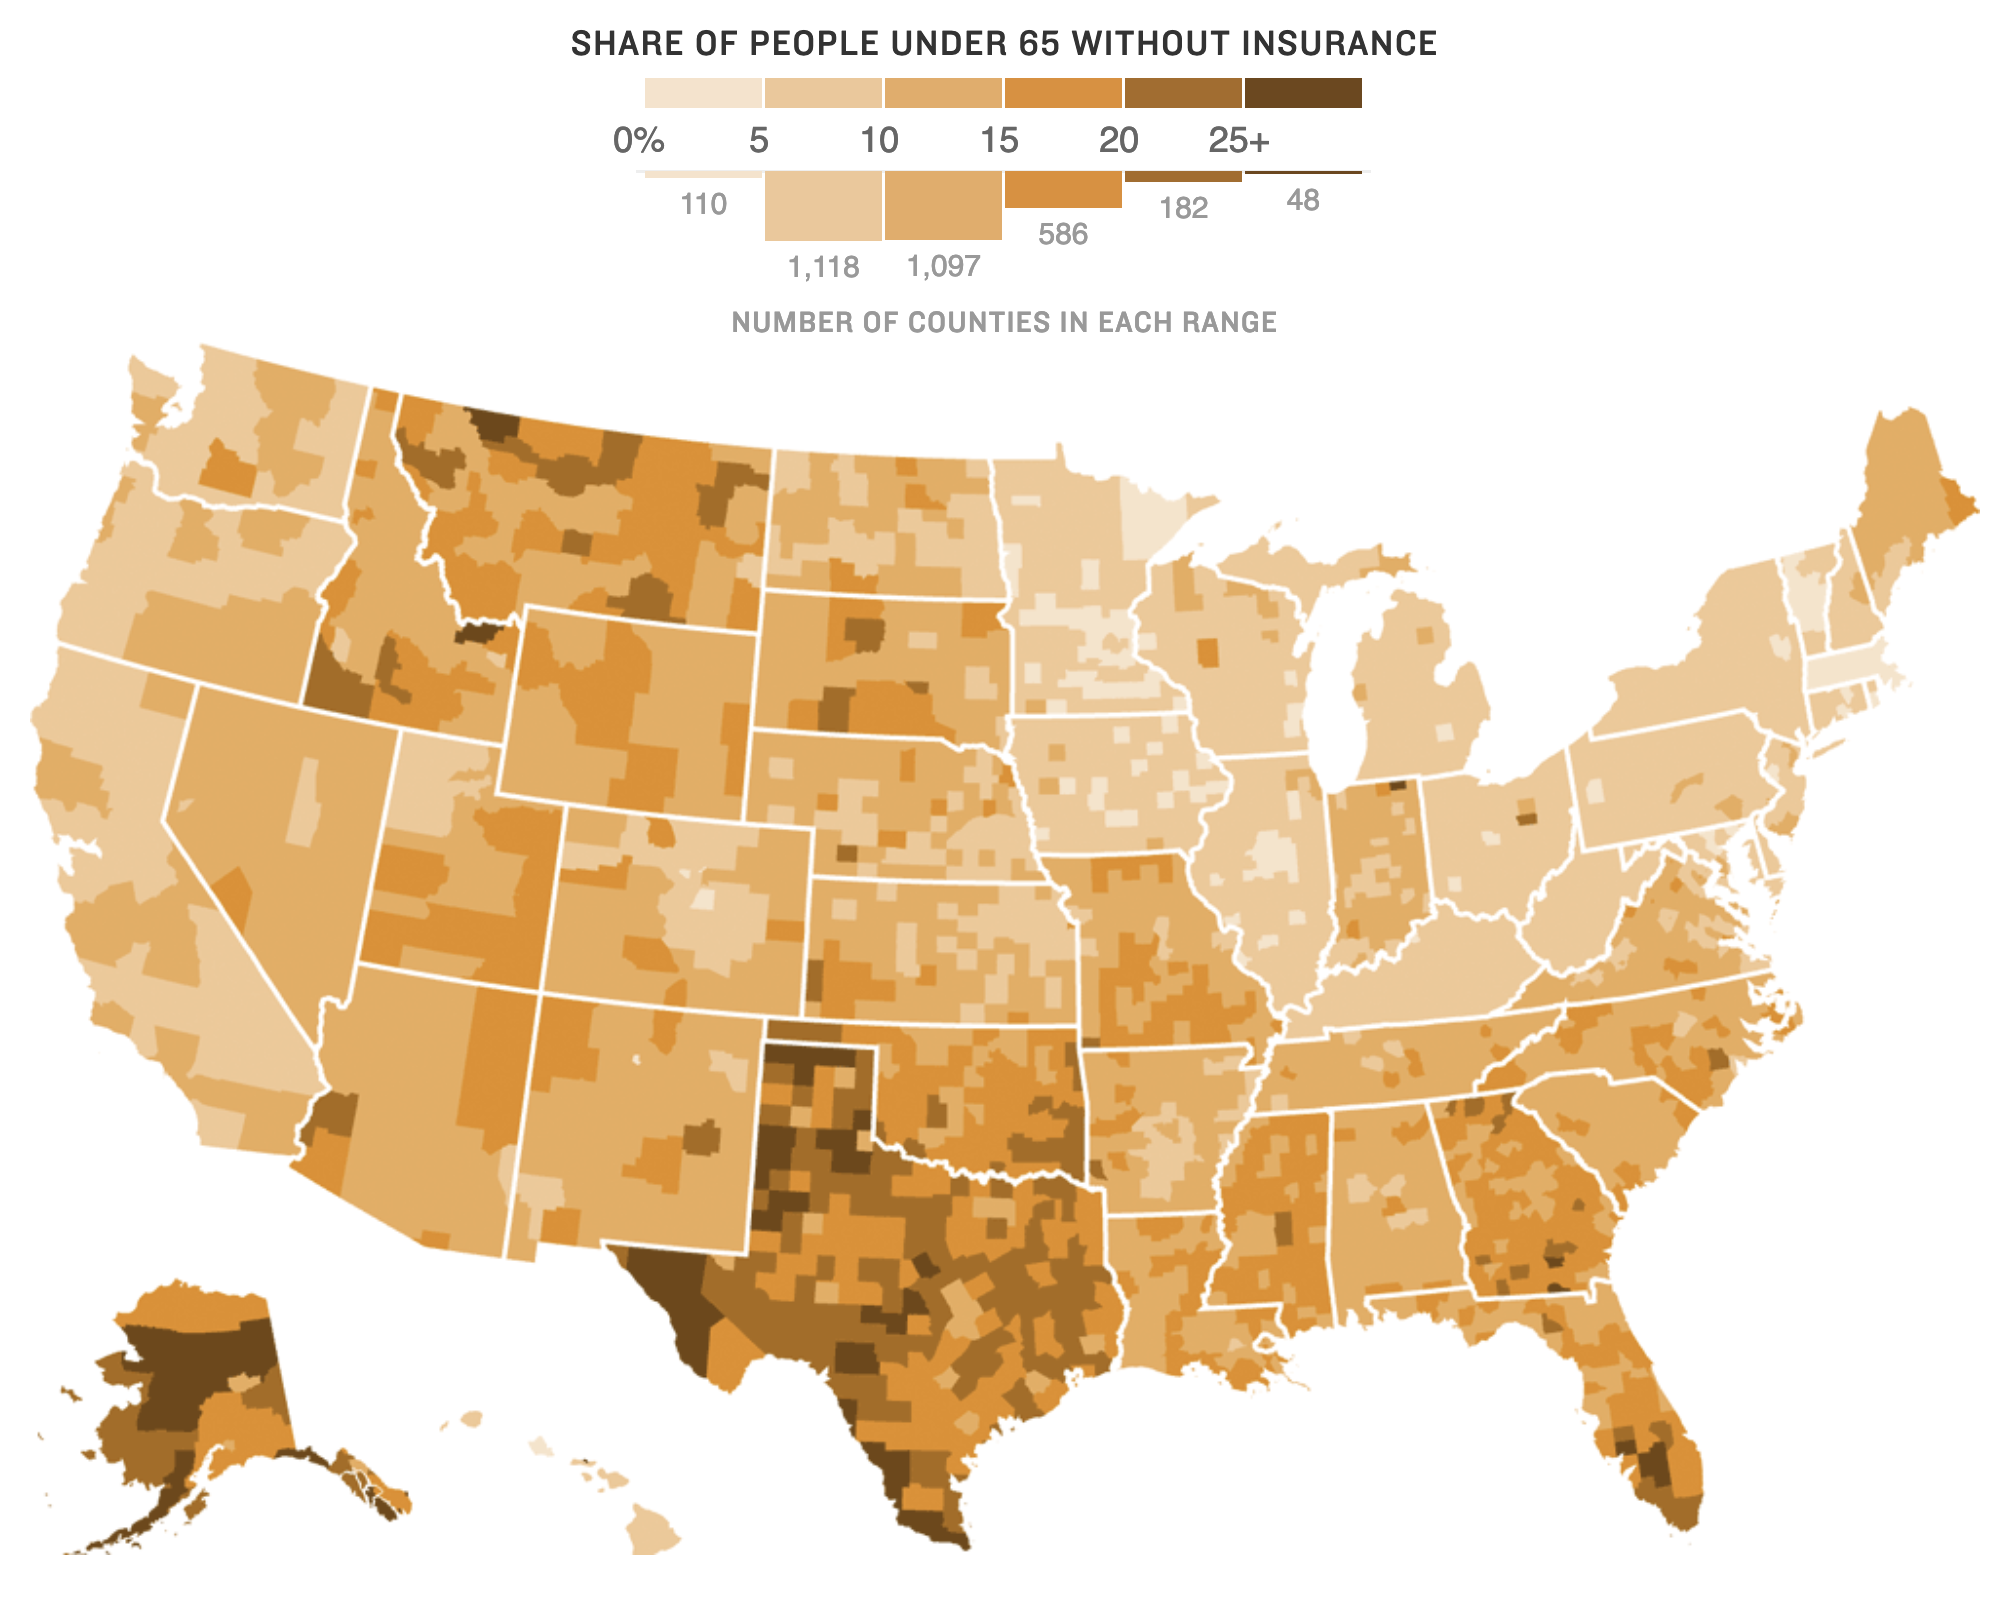 A choropleth map showing the share of people udner 65 without insurance in US counties. The colour legend of the map is also a histogram showing the number of counties in each bucket of the colour scale